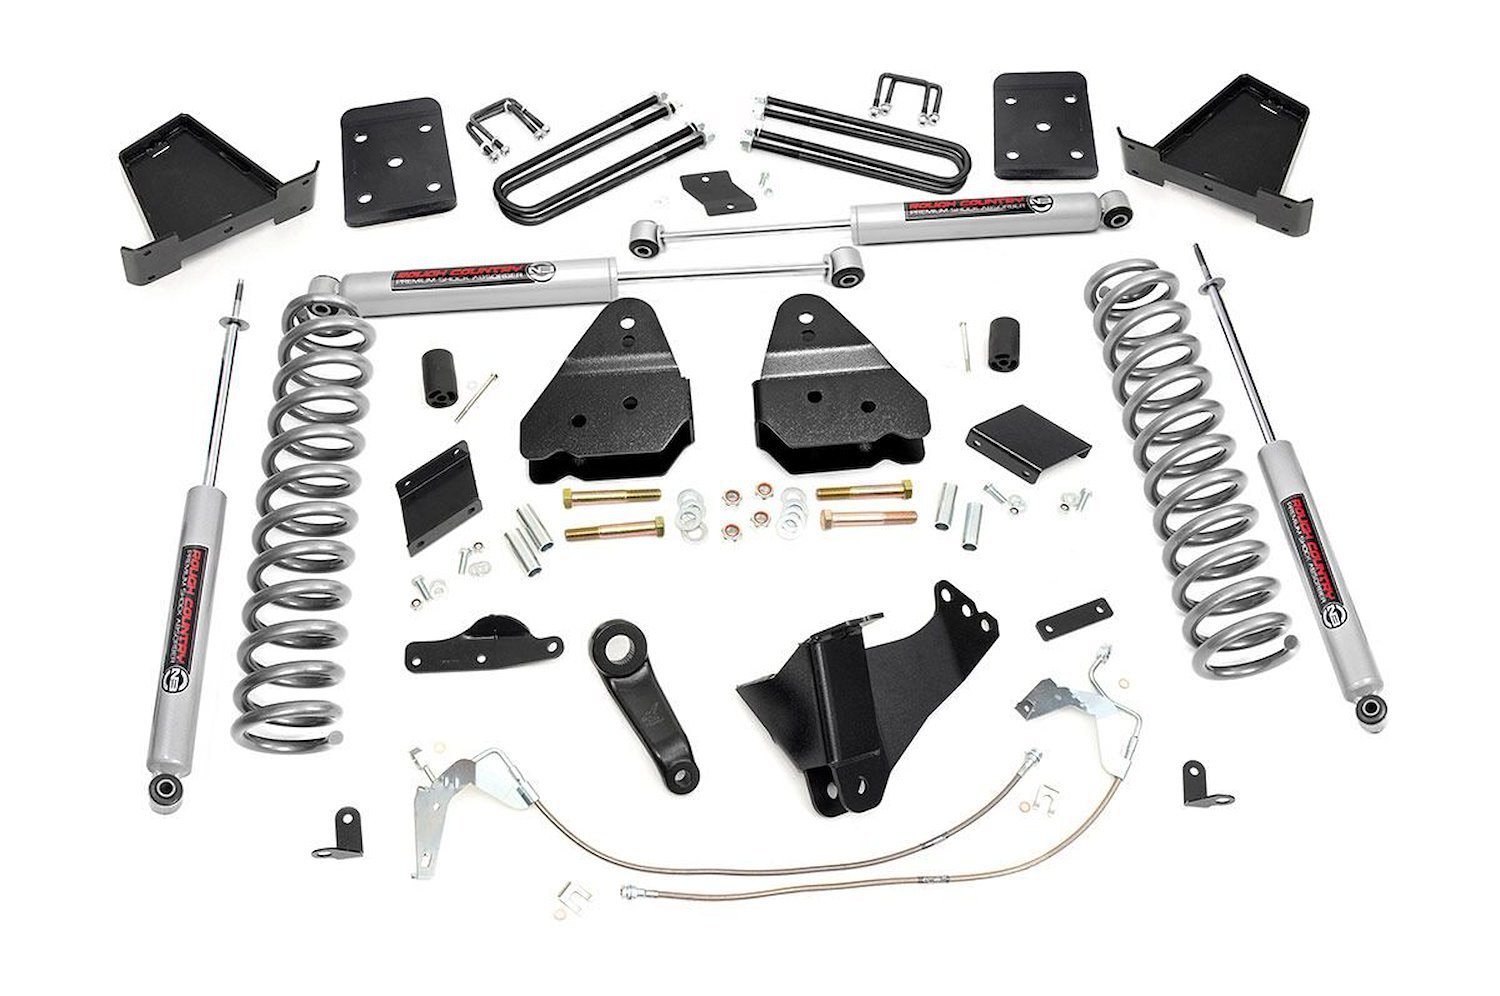 548.20 6 in. Lift Kit, Diesel, OVLD, Ford Super Duty 4WD (2015-2016)